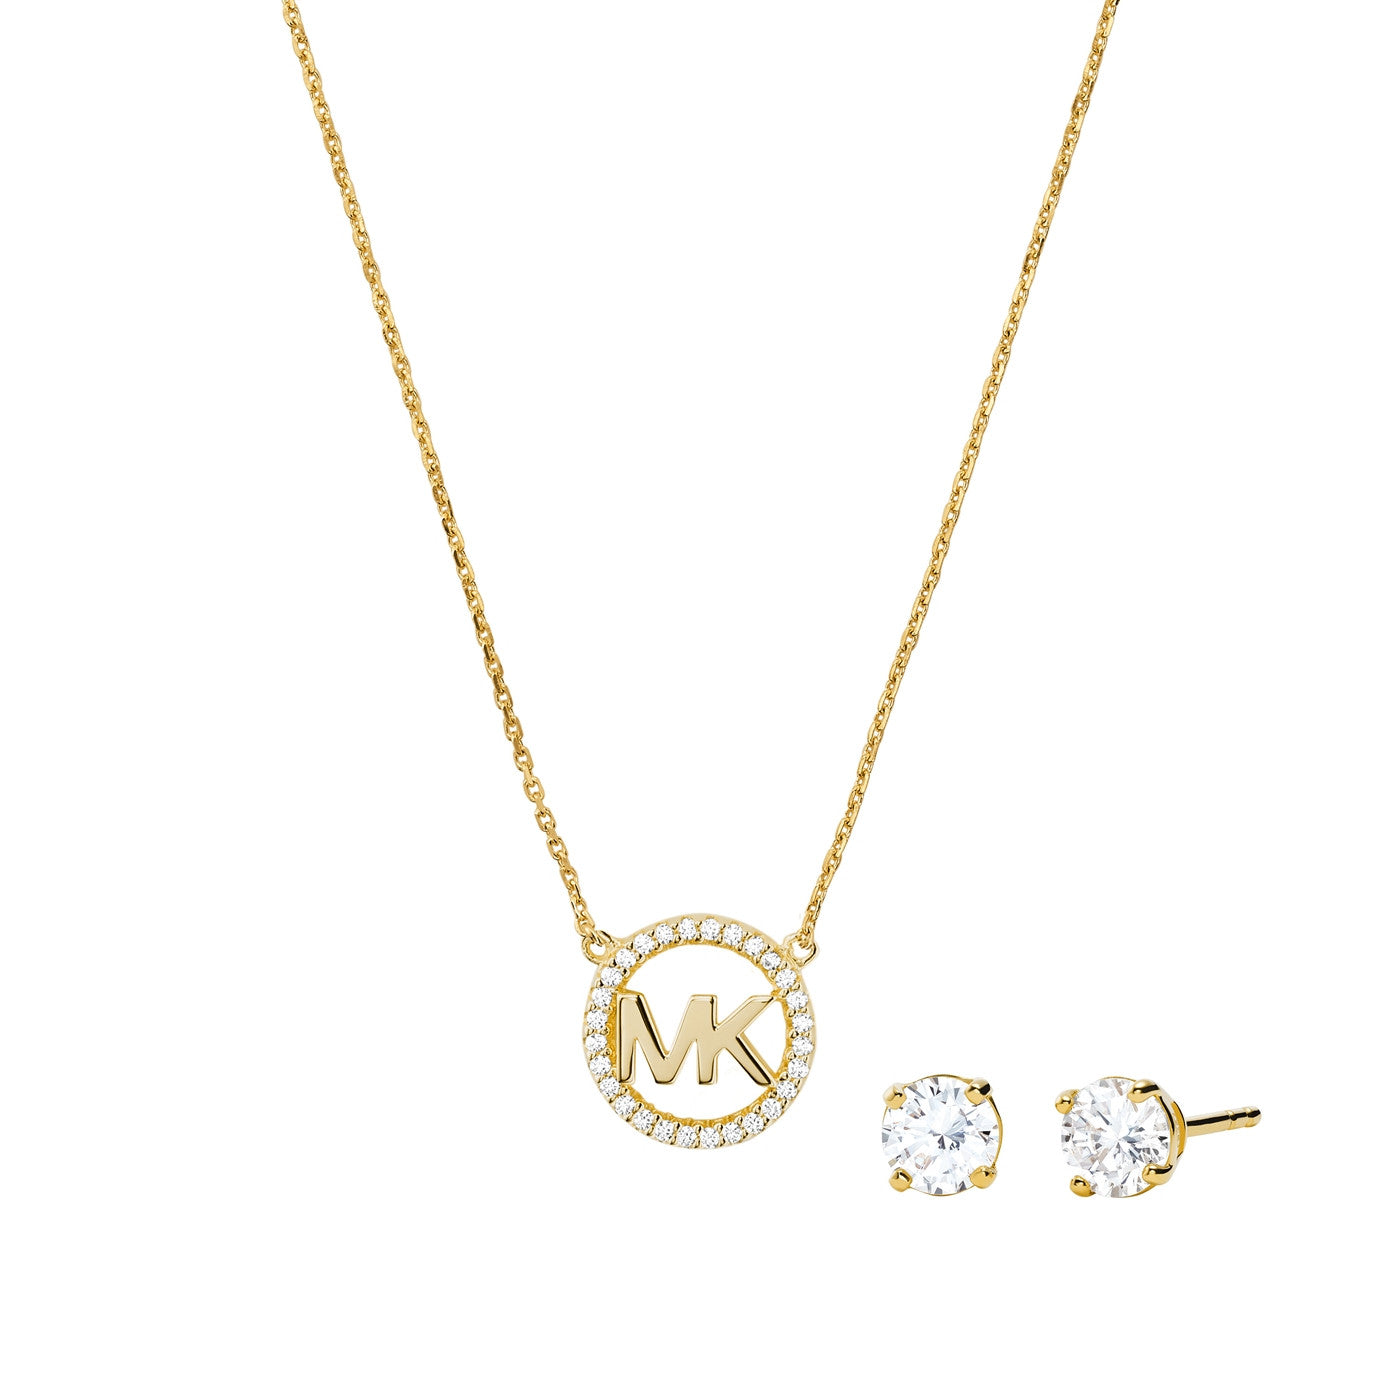 Michael Kors 14k Gold-Plated Sterling Silver Necklace Box Set MKC1260AN710